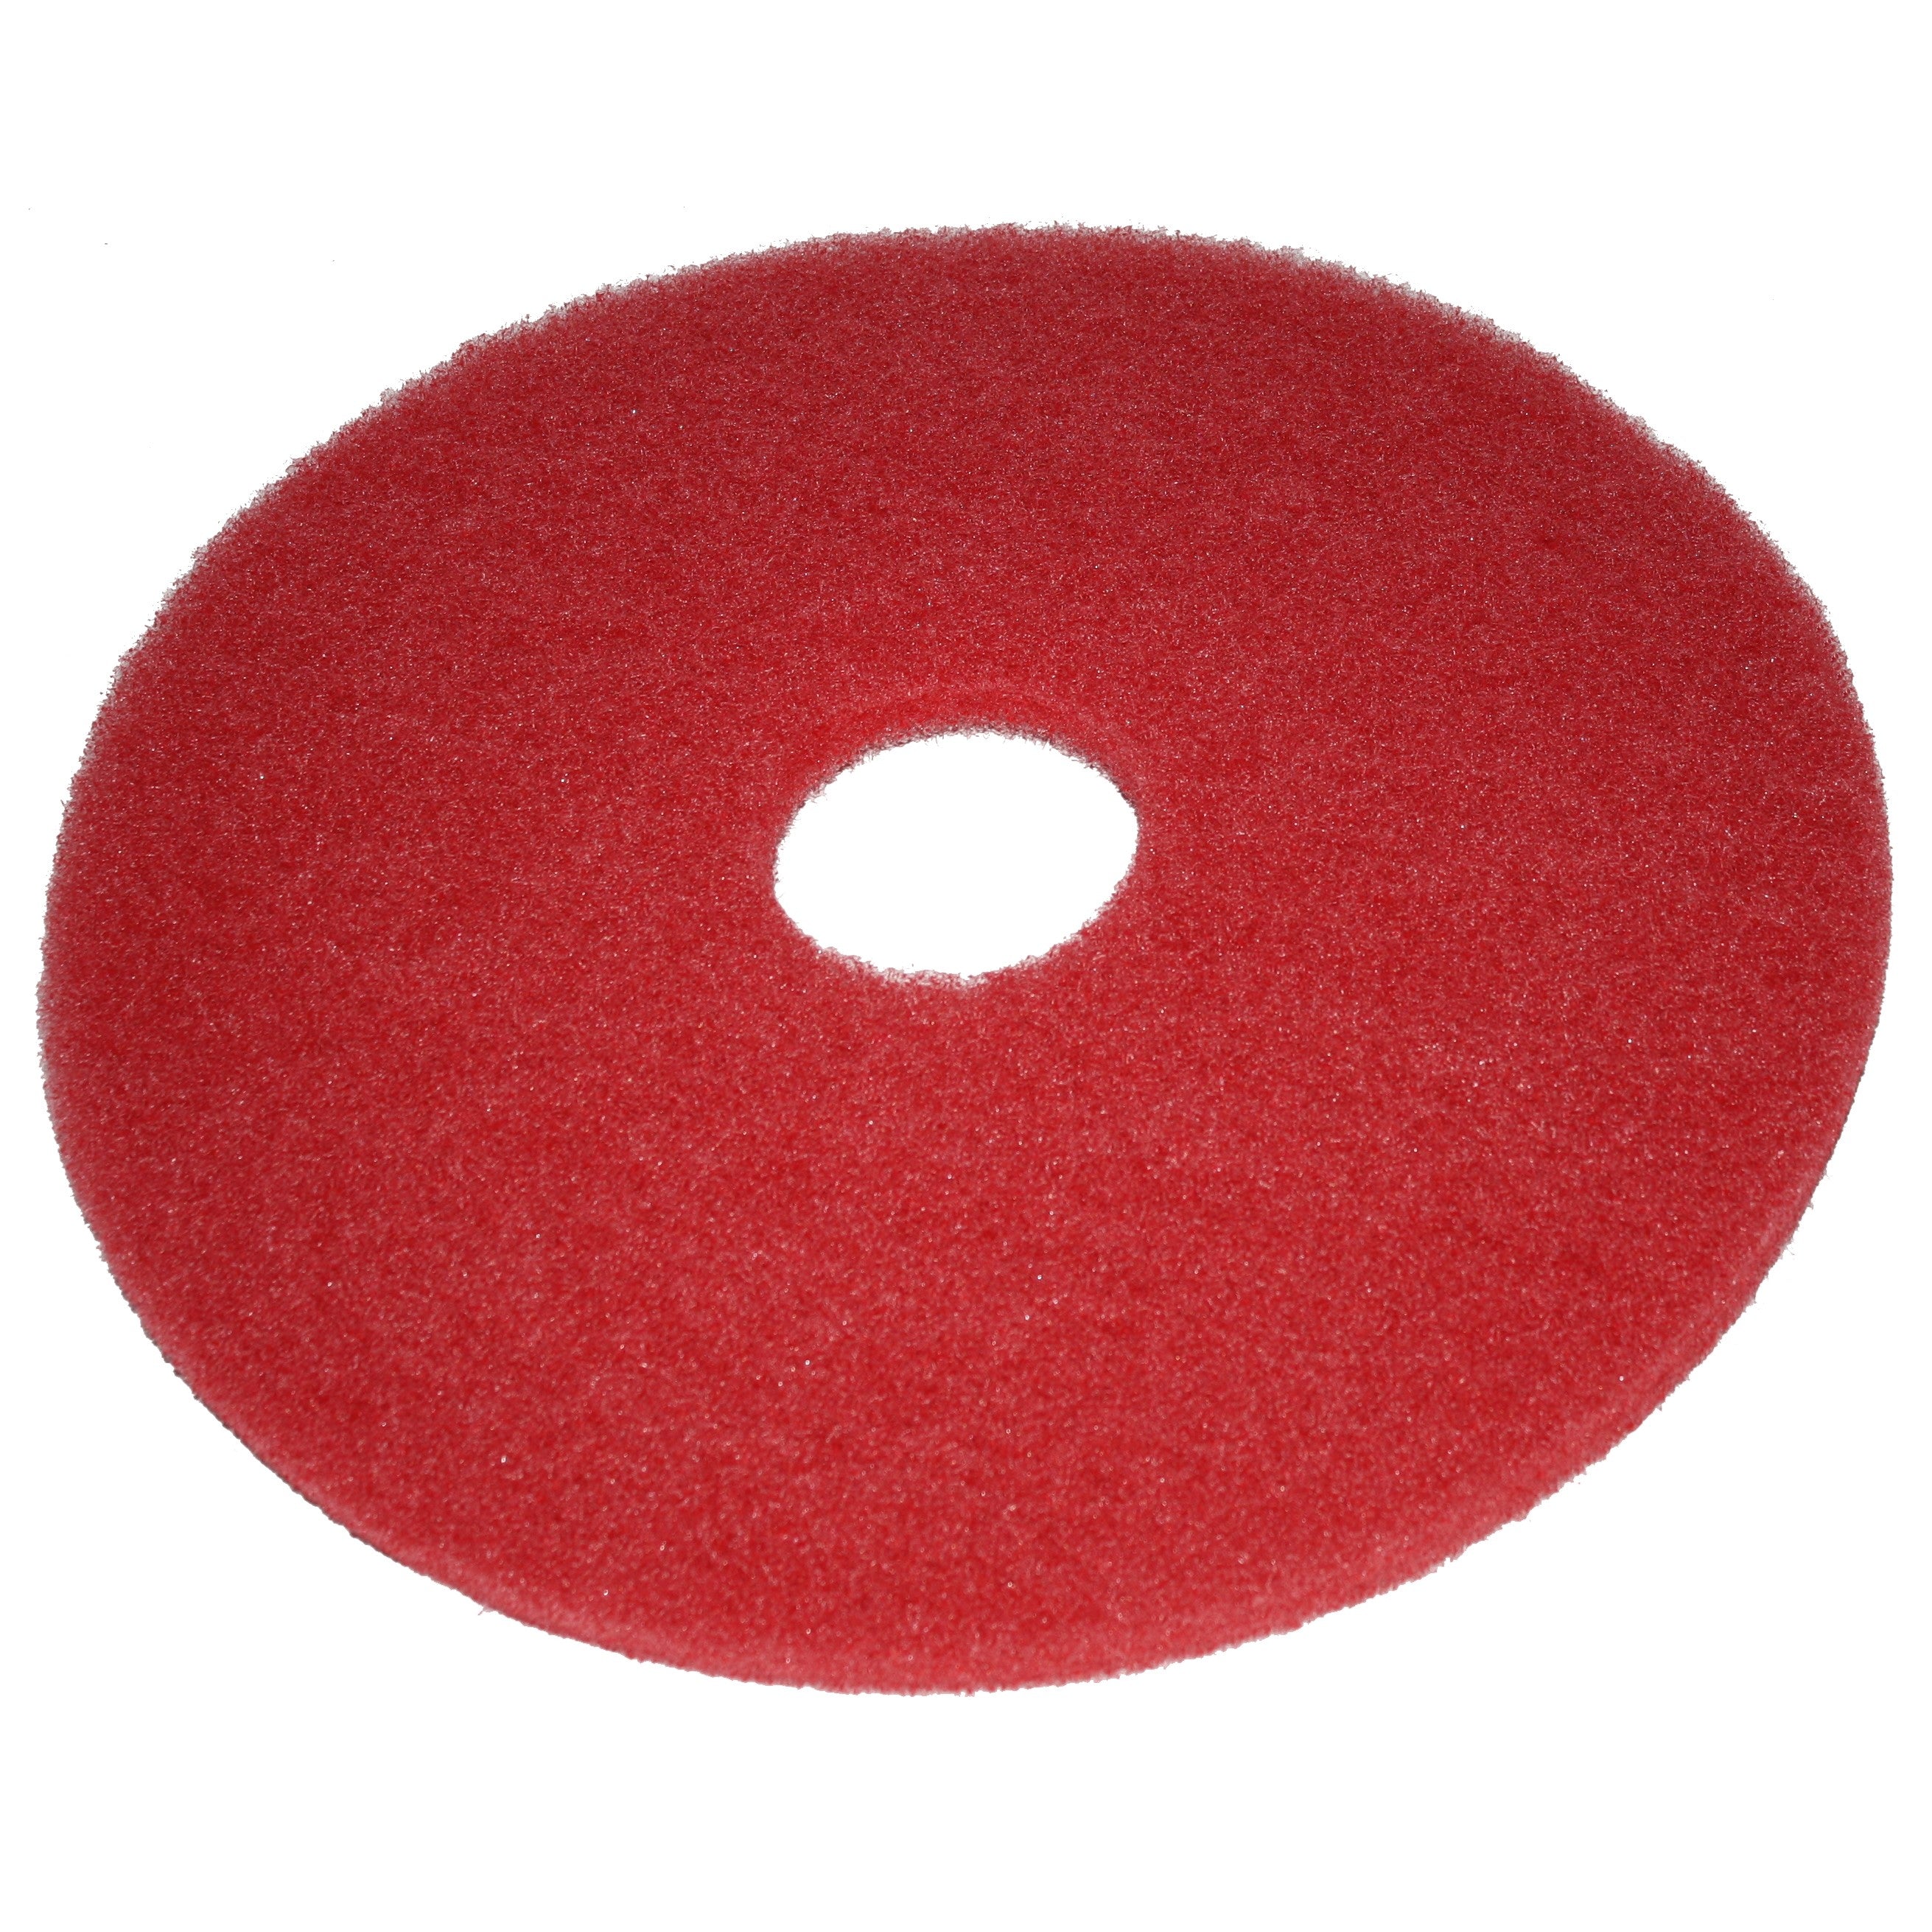 Pad rouge, Ø 280 mm, polyester